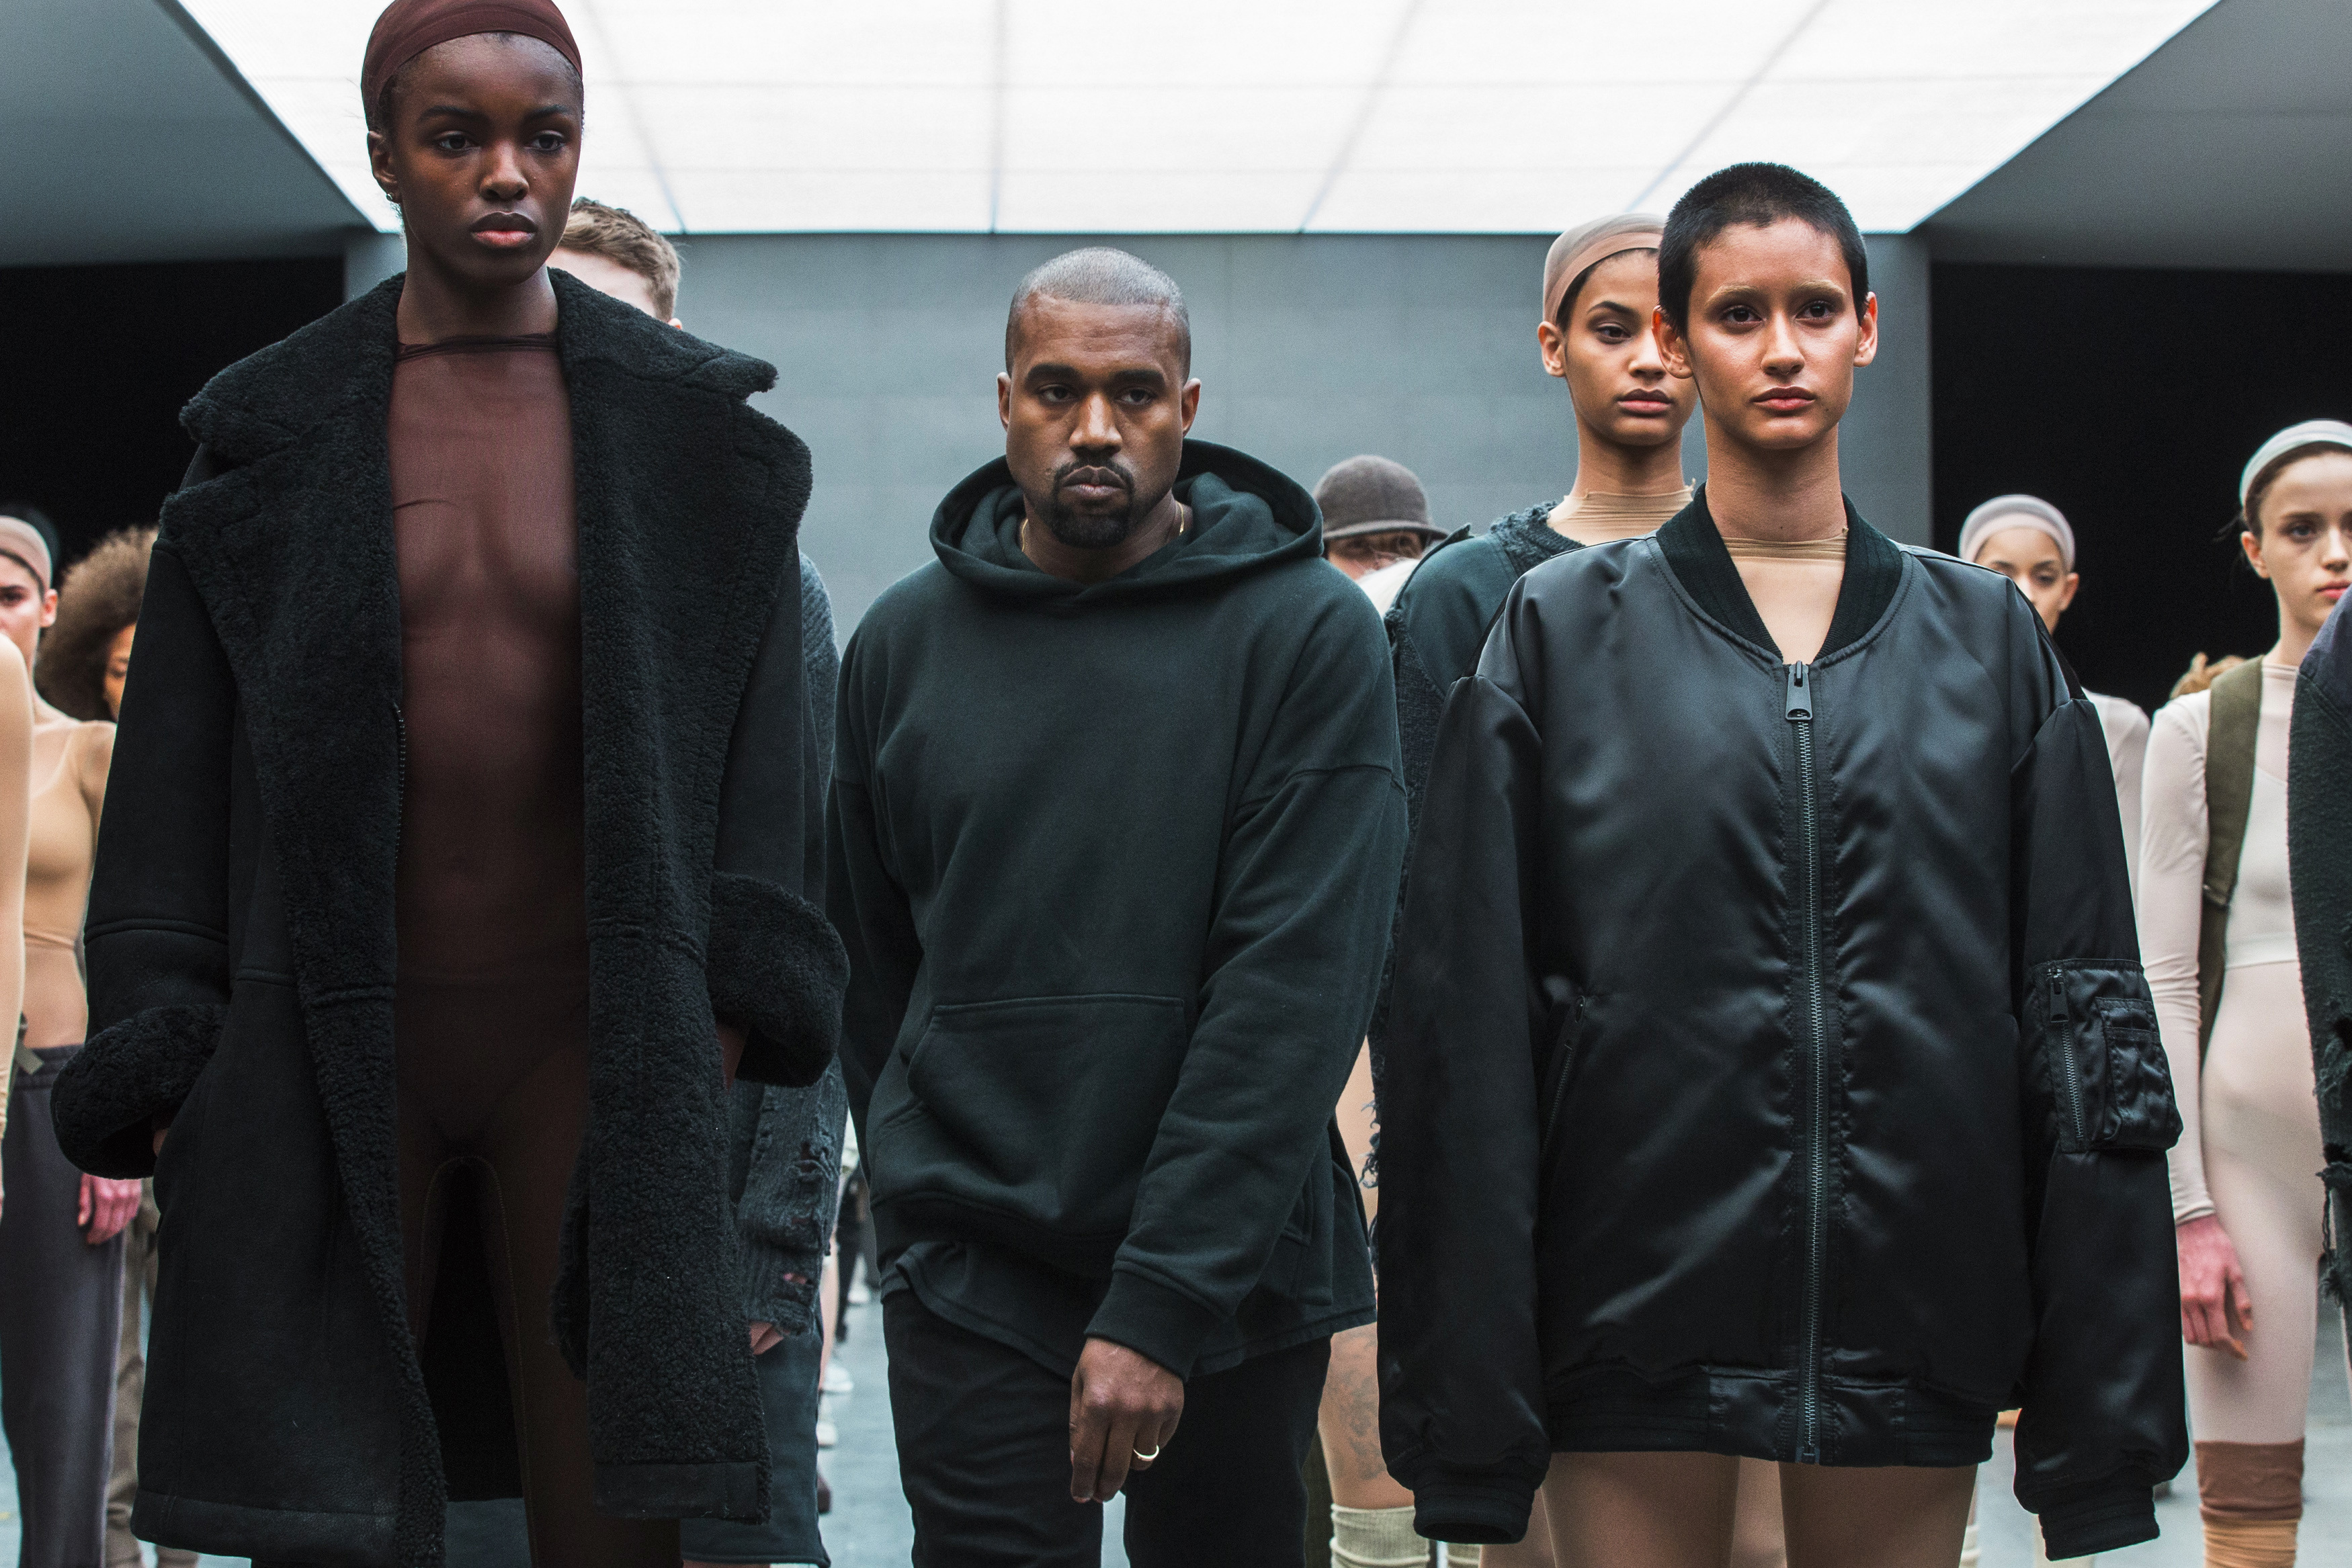 Singer Kanye West walks past models after presenting his Fall/Winter 2015 partnership line with Adidas at New York Fashion Week